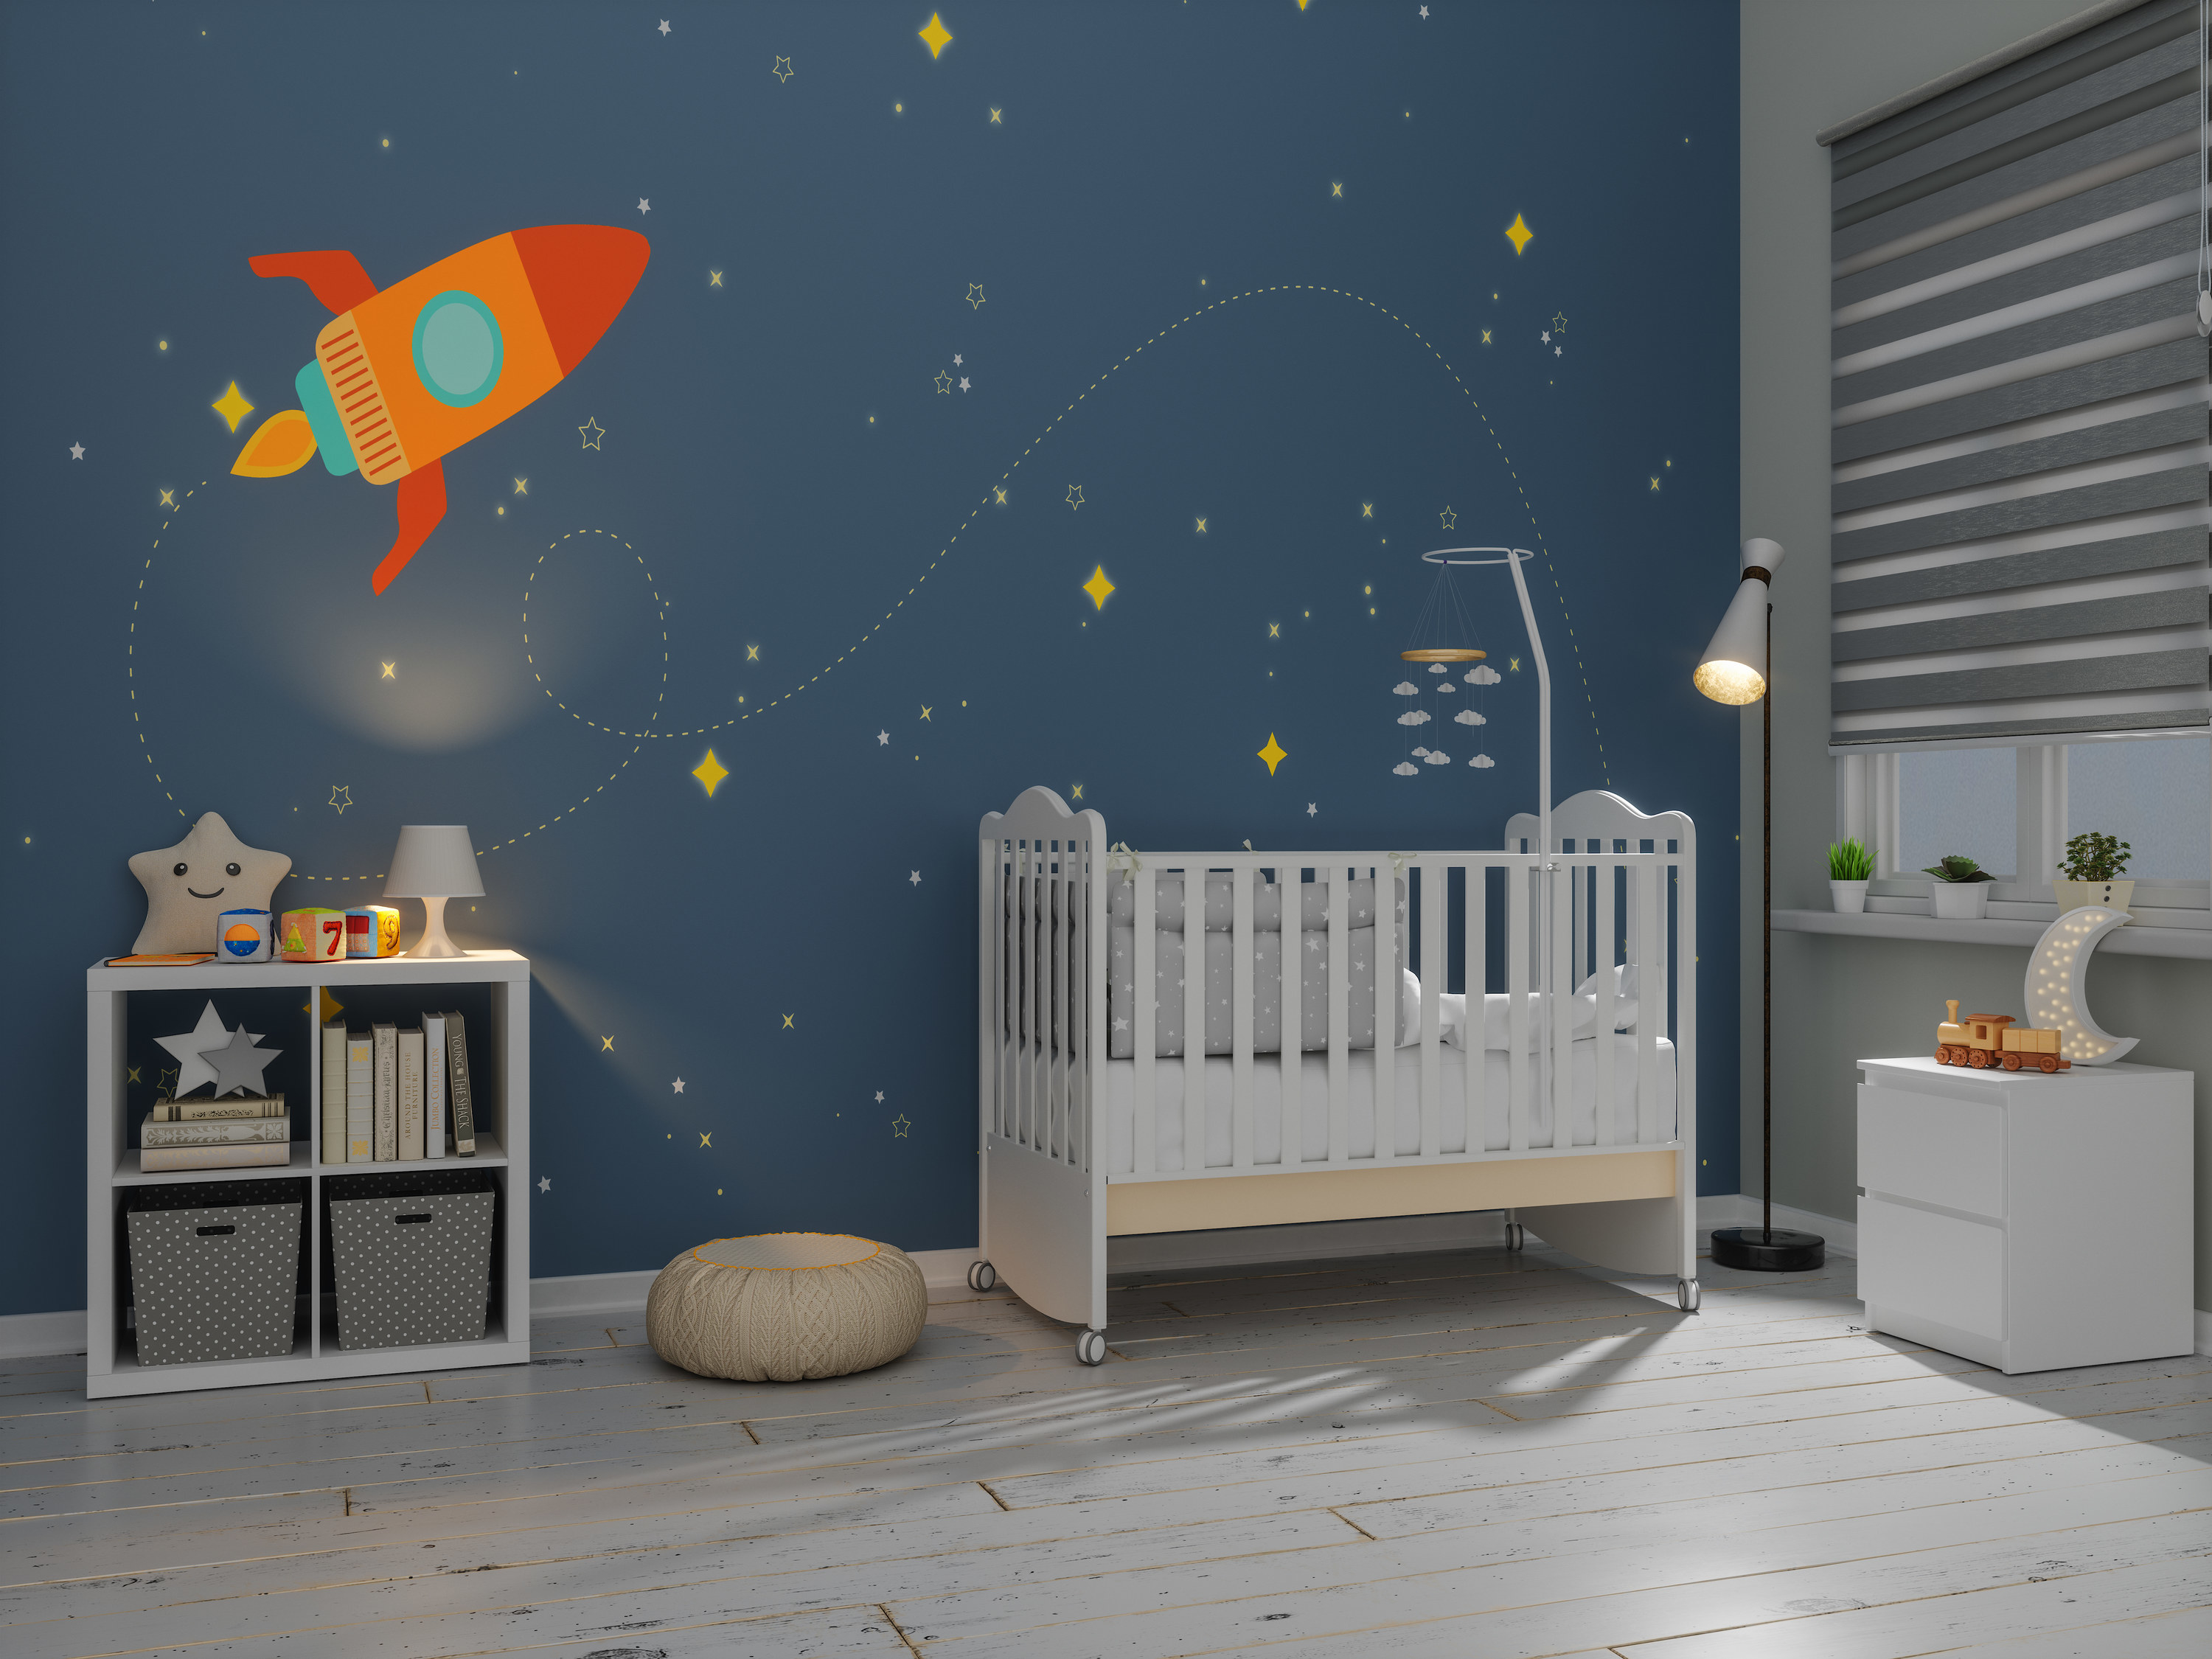 Nursery with a crib, bookshelf, and mural of a rocket